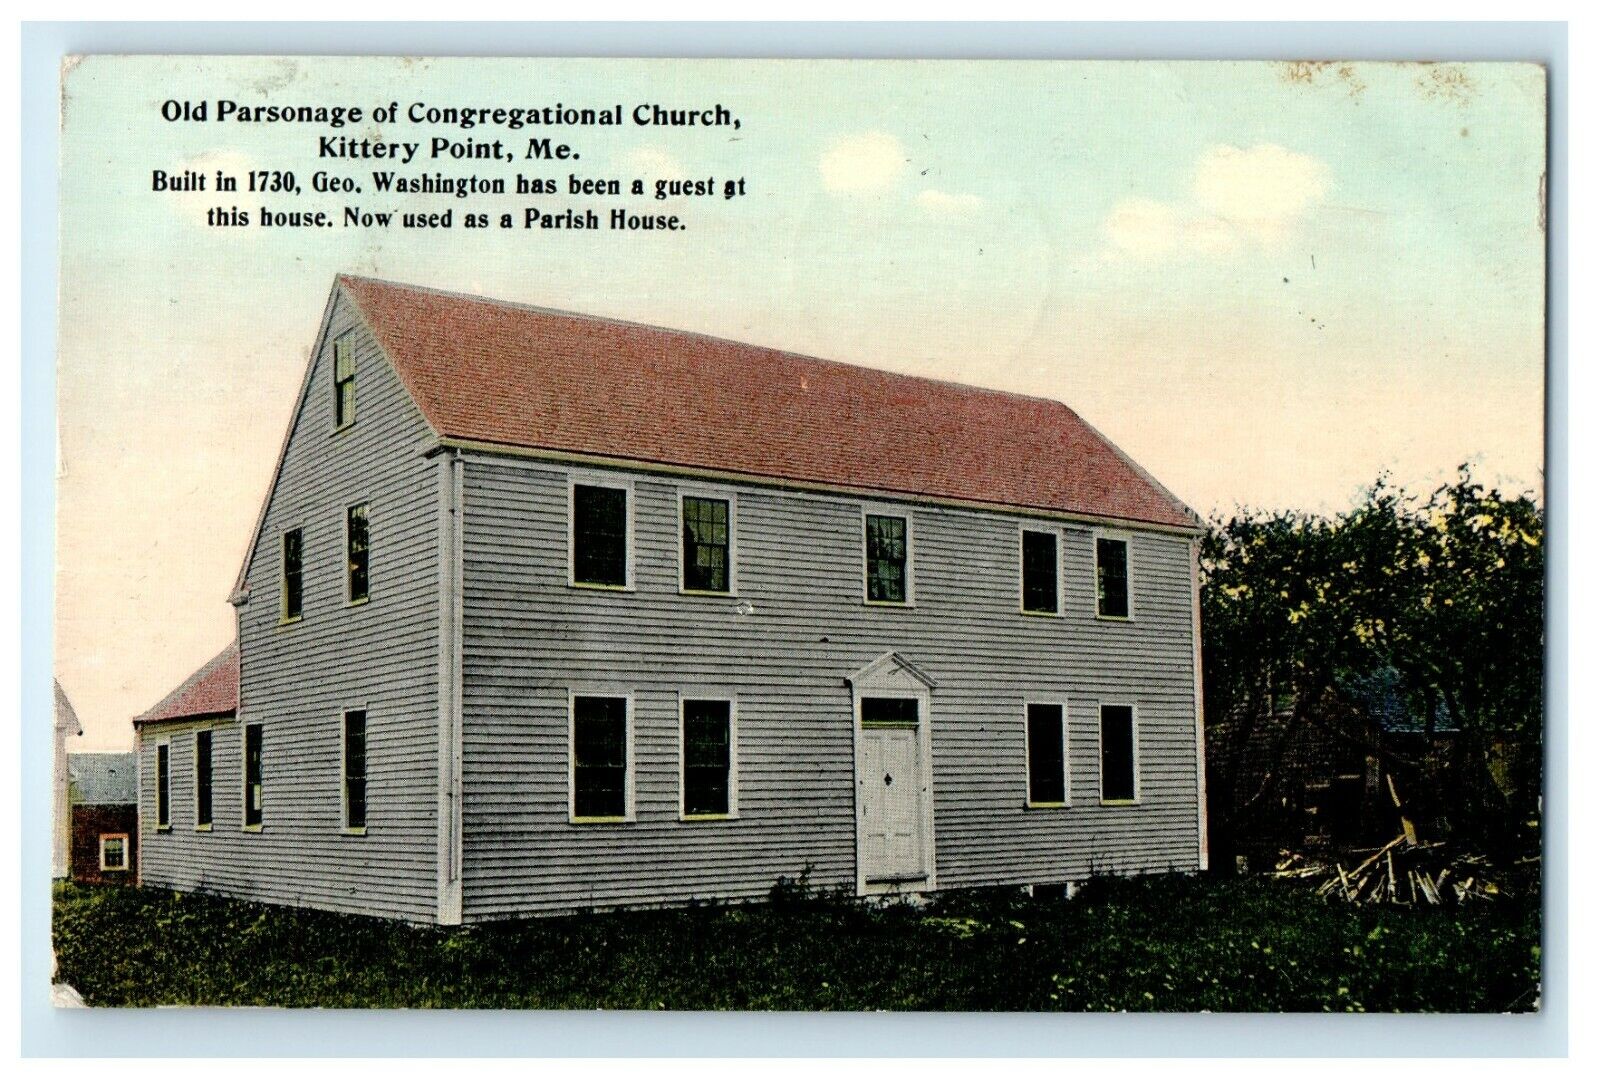 1916 Old Parsonage of Congregational Church, Kittery Point, Maine ME Postcard